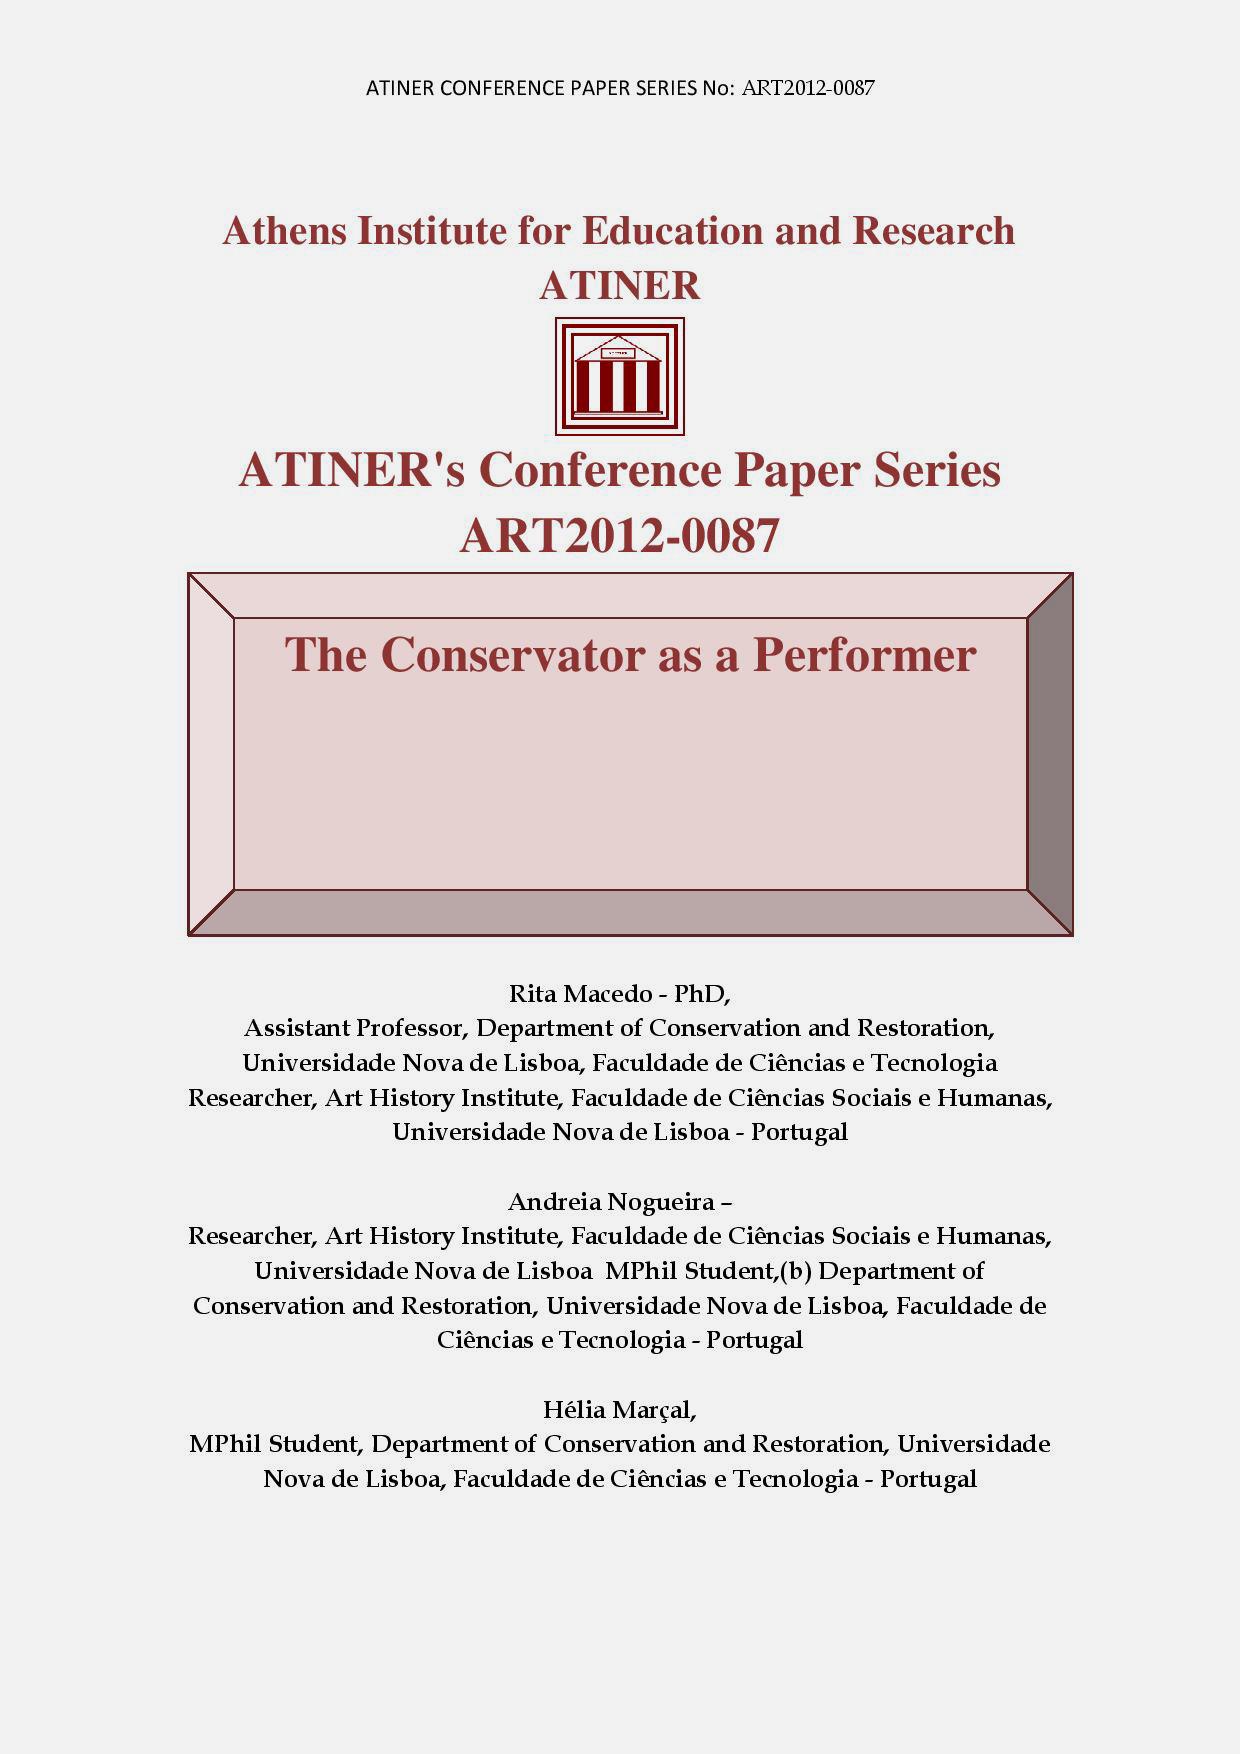 The Conservator as a Performer [ATINER'S conference paper series]